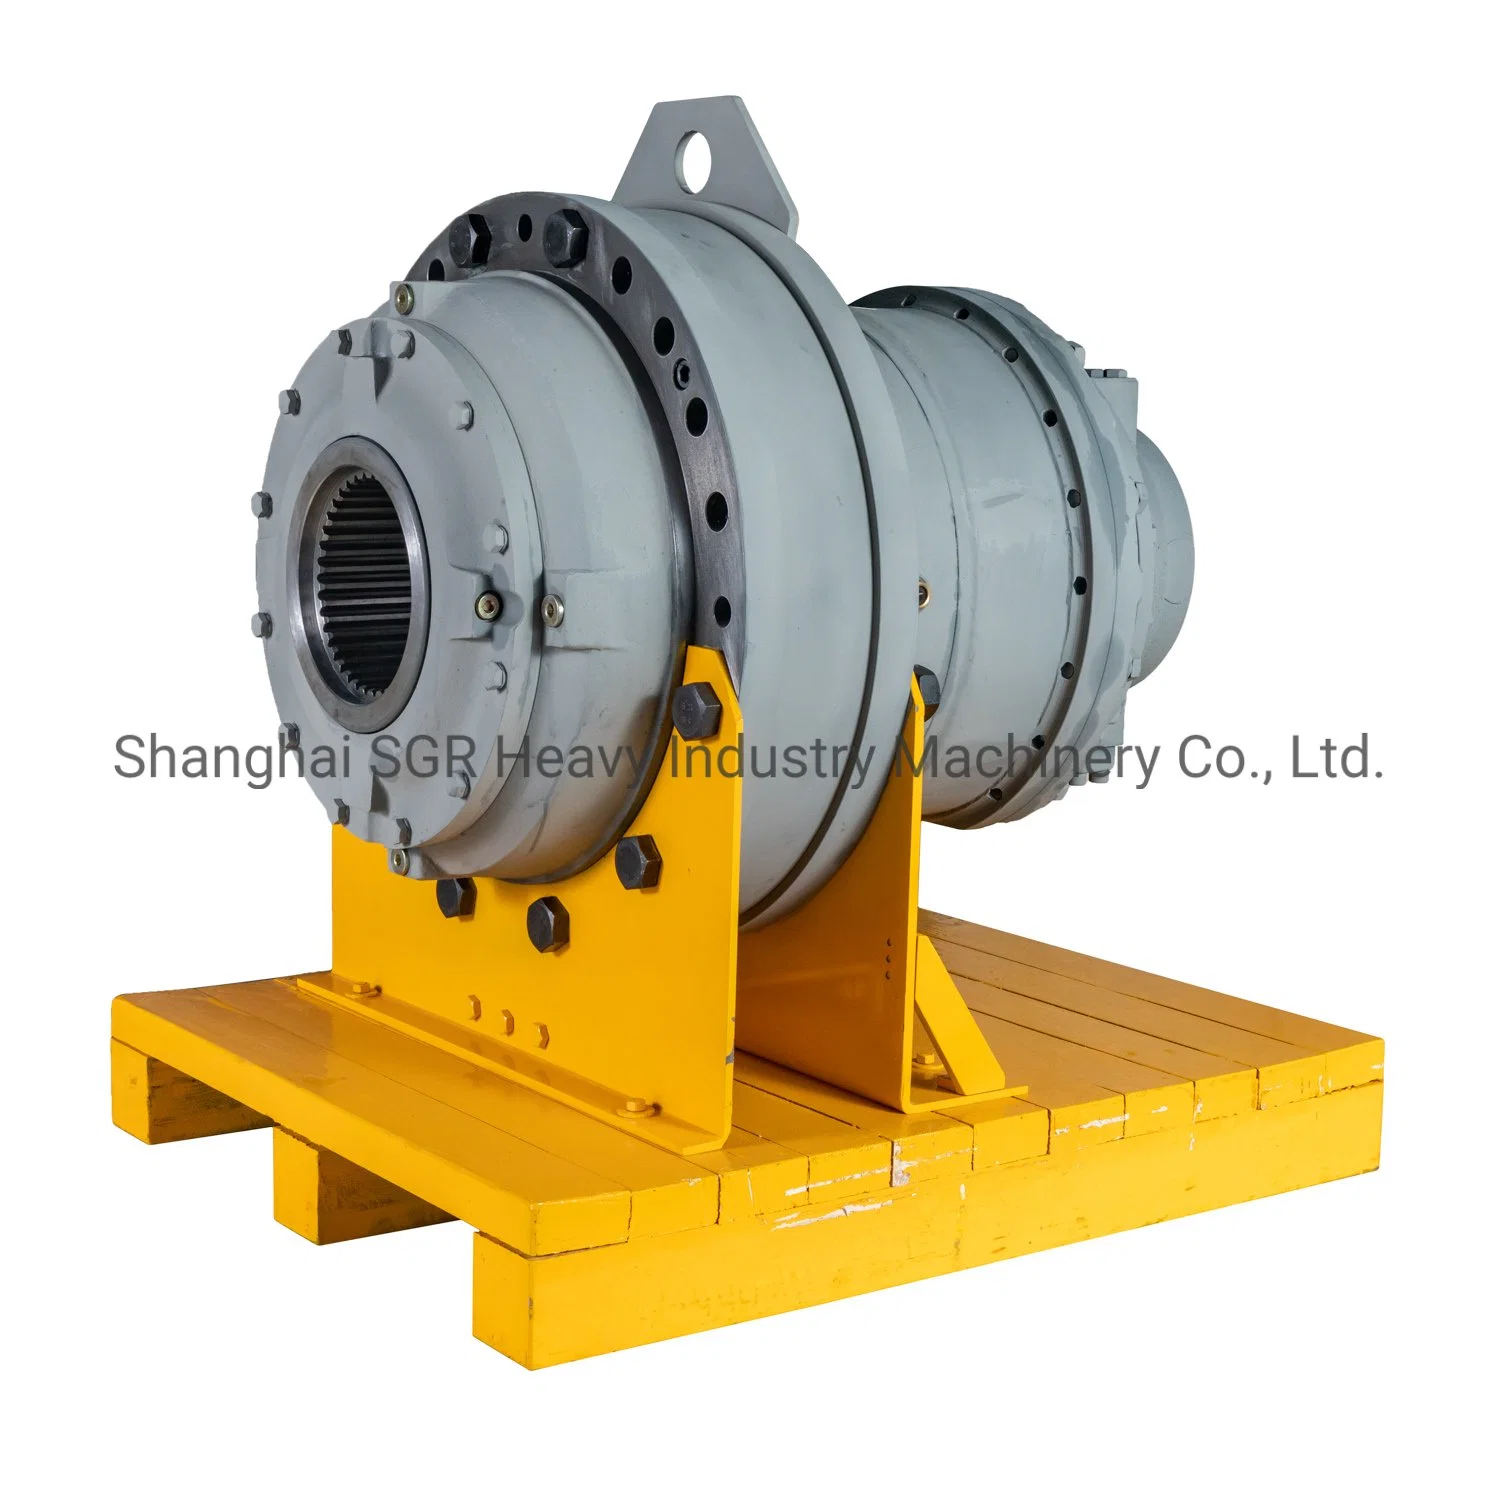 Flange Input Right Angle Big Output Torque Transmission Planetary Gearbox with Motor